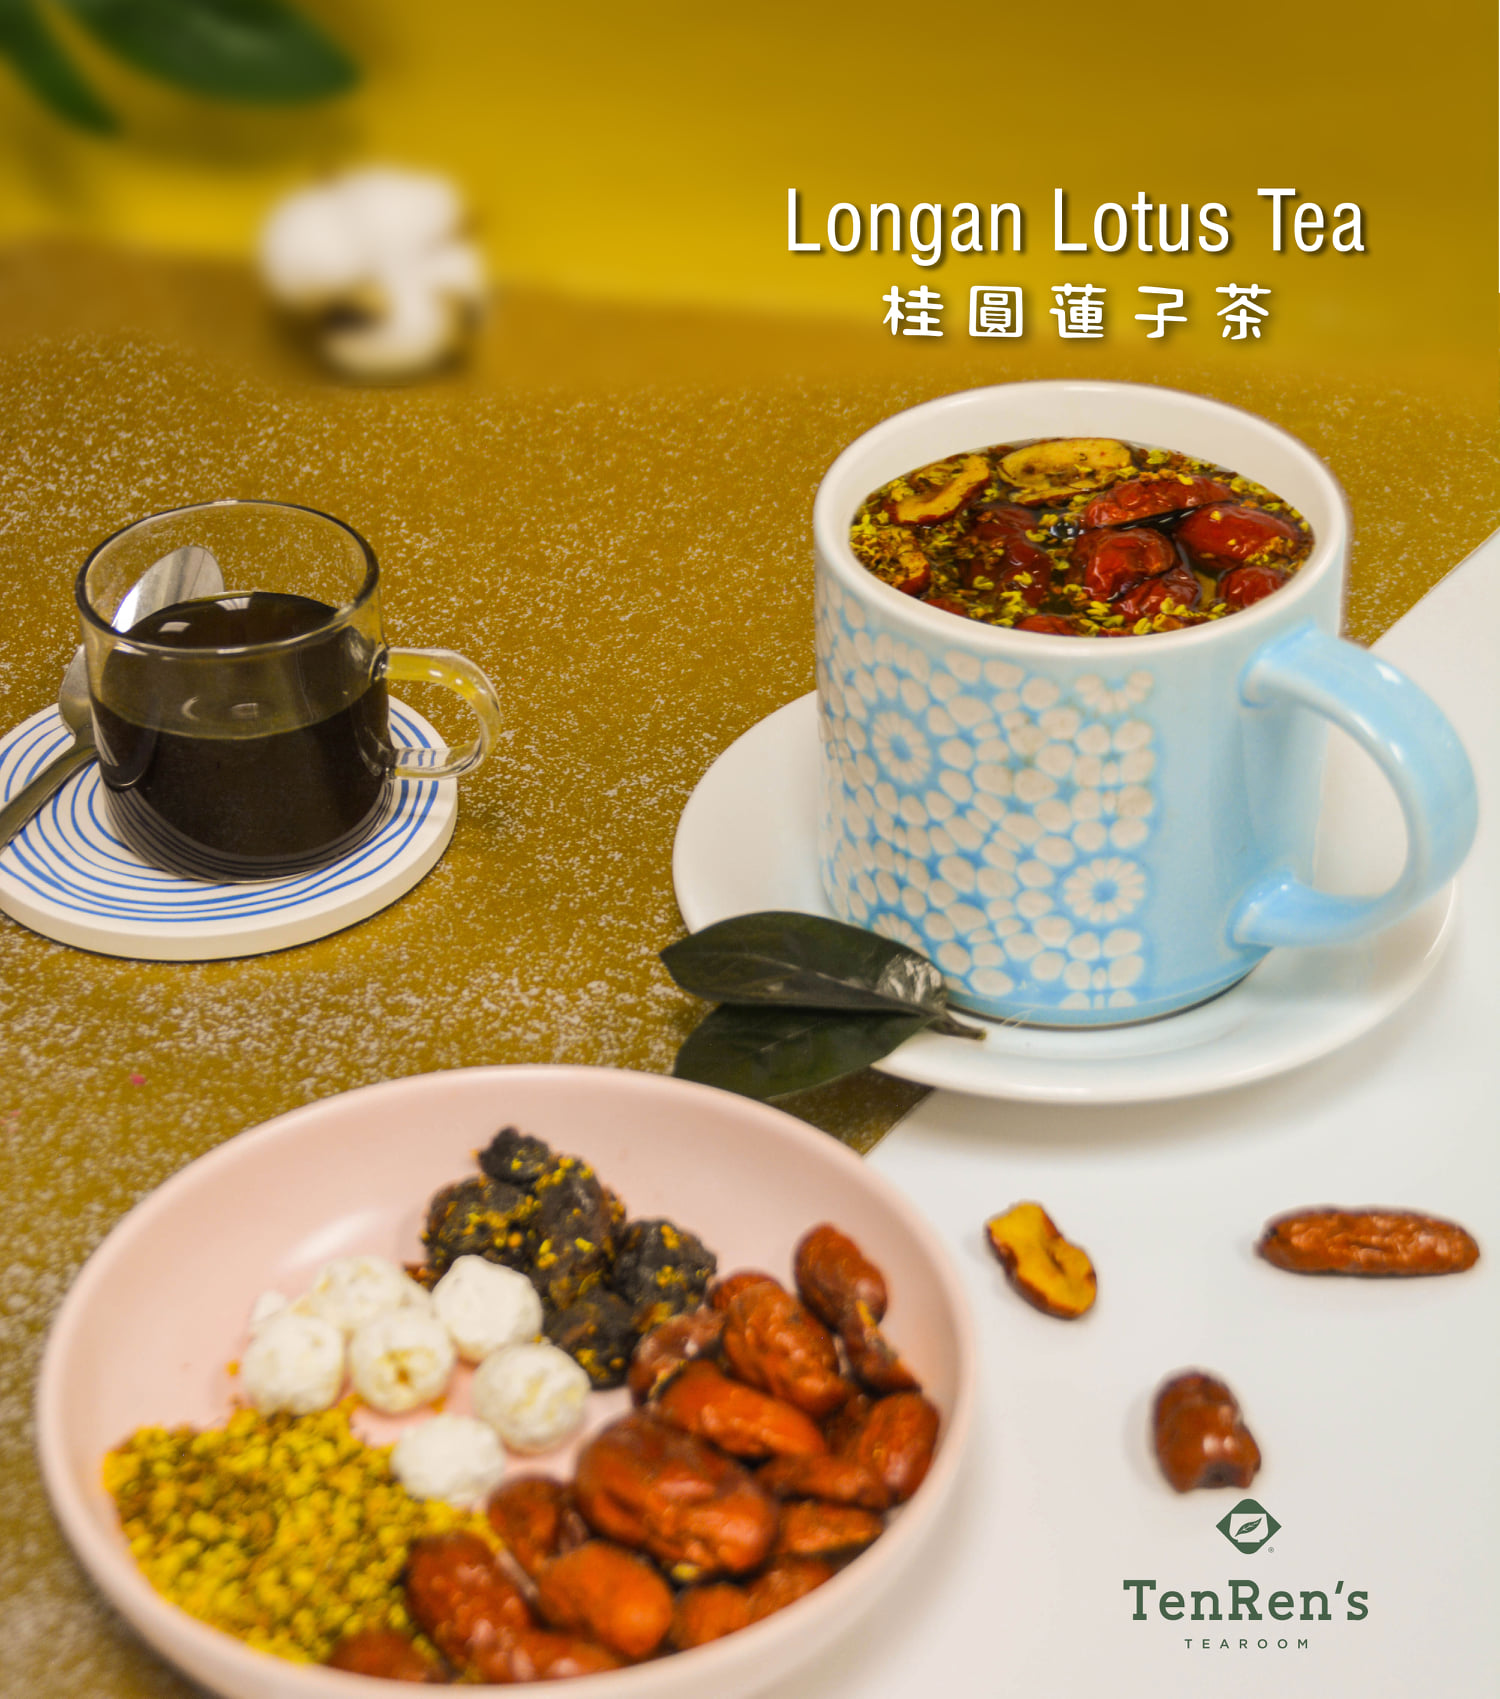 Ten Ren’s Longan lotus tea is a nourishing drink with natural sweetness. It has a pleasant taste and contains niacin, which aids metabolism and keeps the skin, nervous, and digestive systems healthy.  Available At: